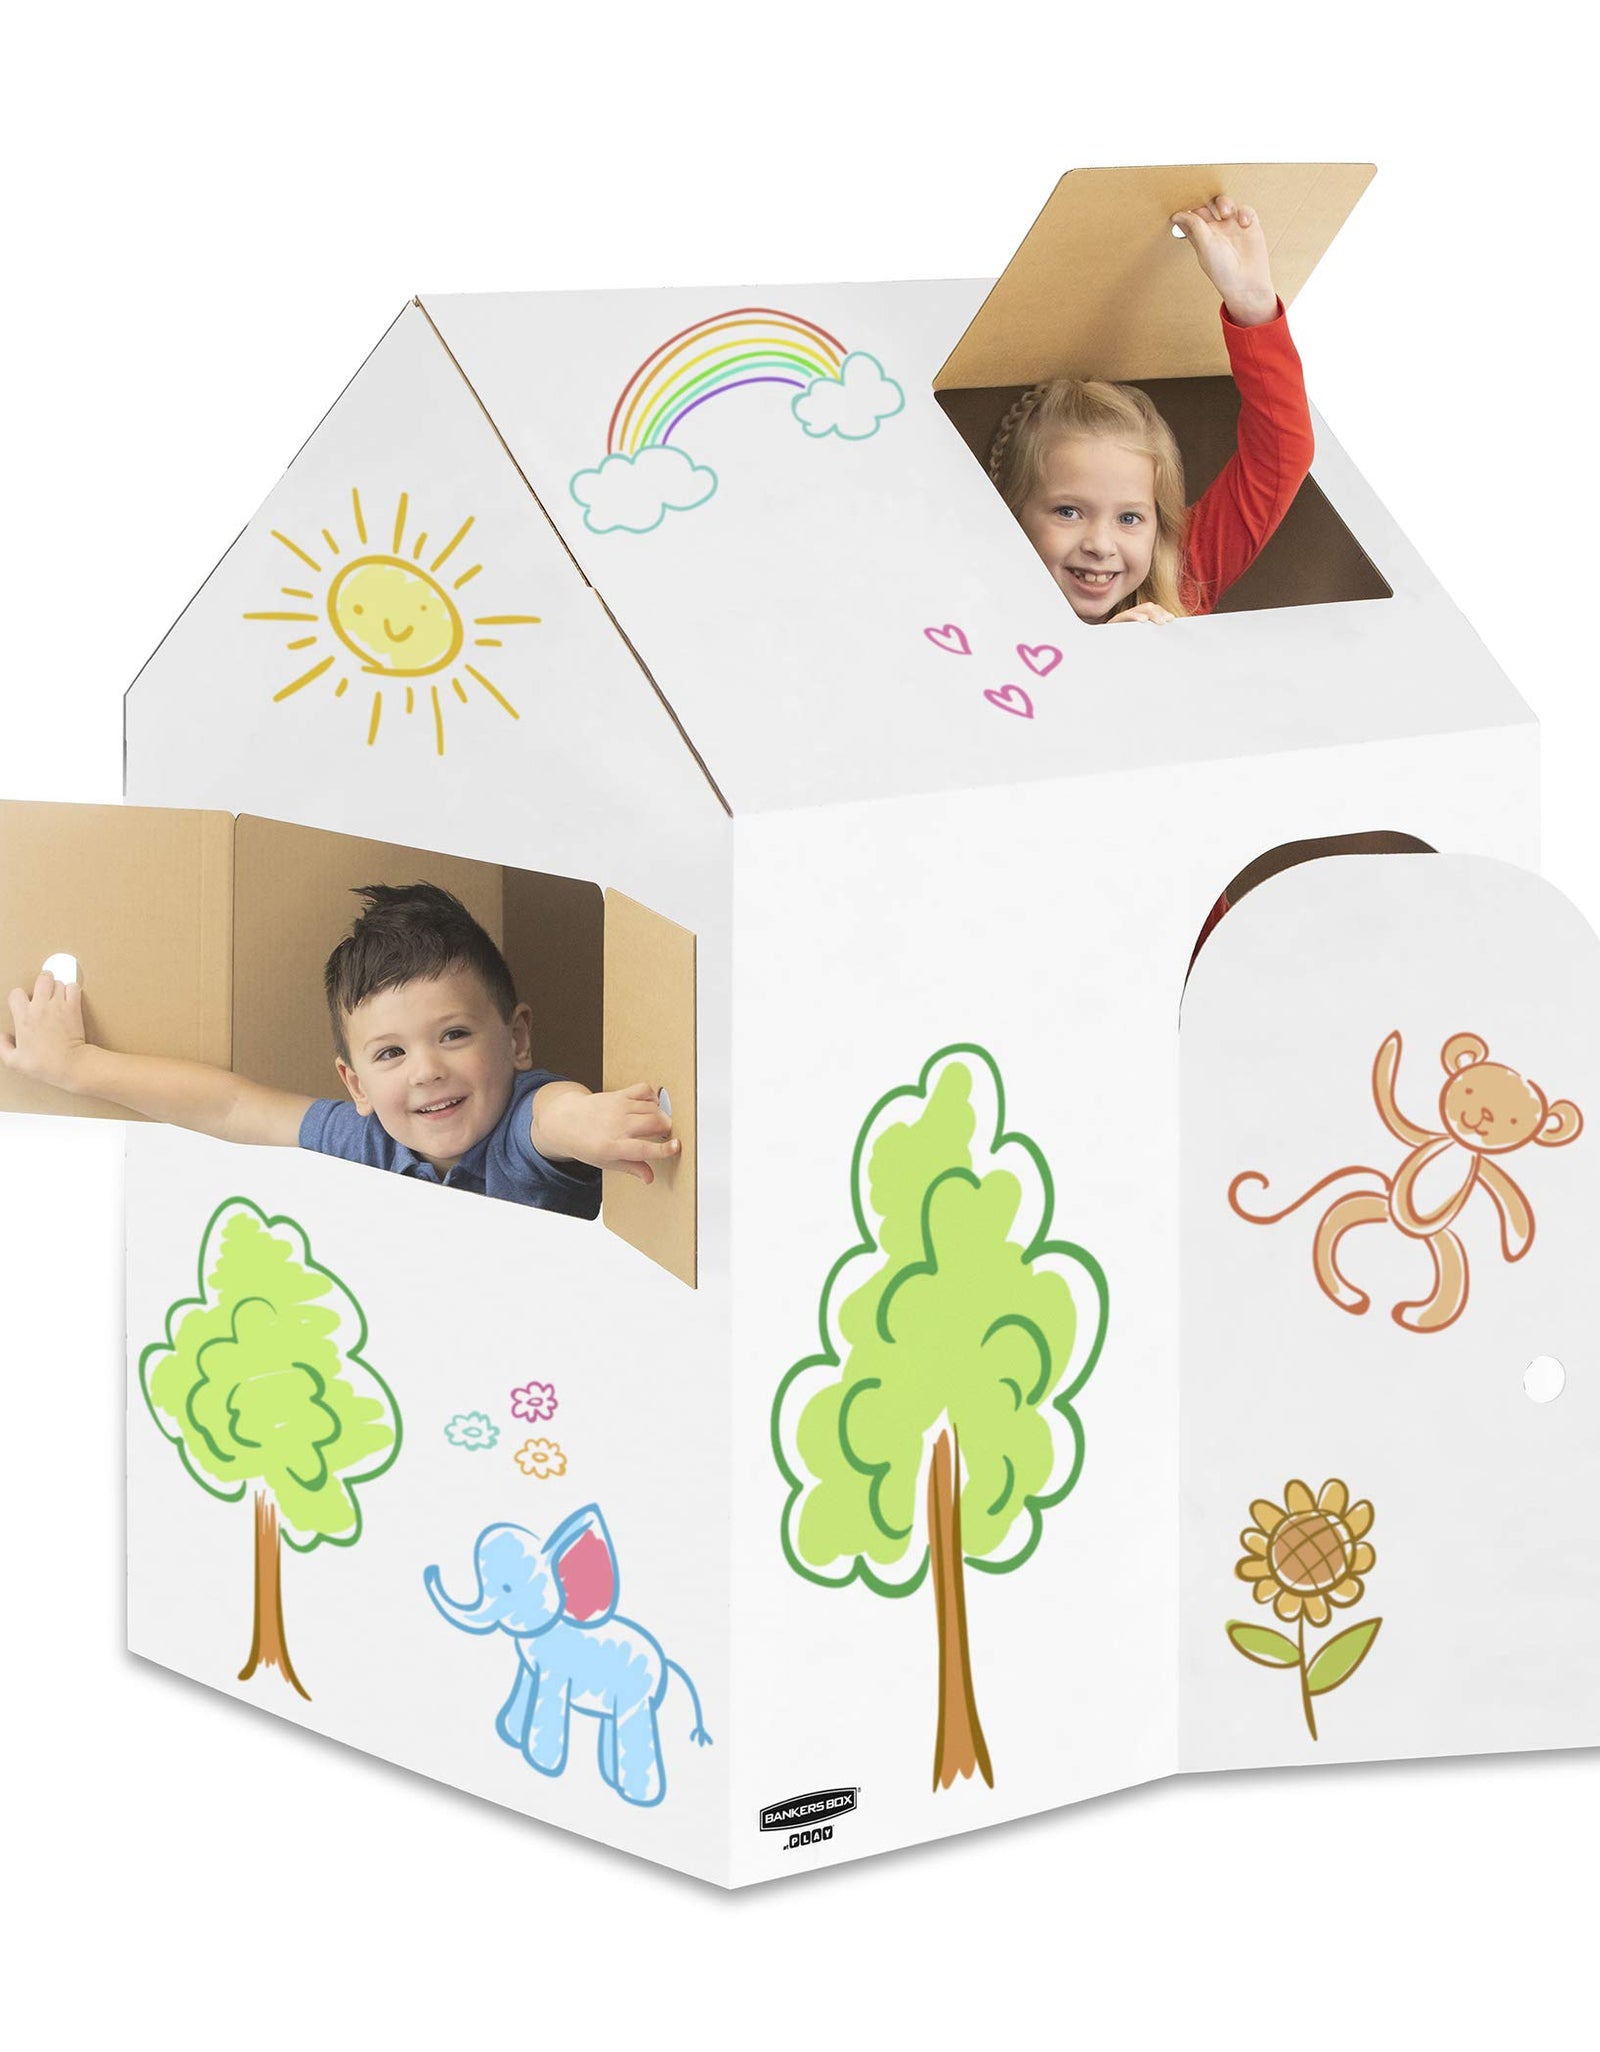 Bankers Box at Play Gingerbread Playhouse, Cardboard Playhouse and Craft Activity for Kids